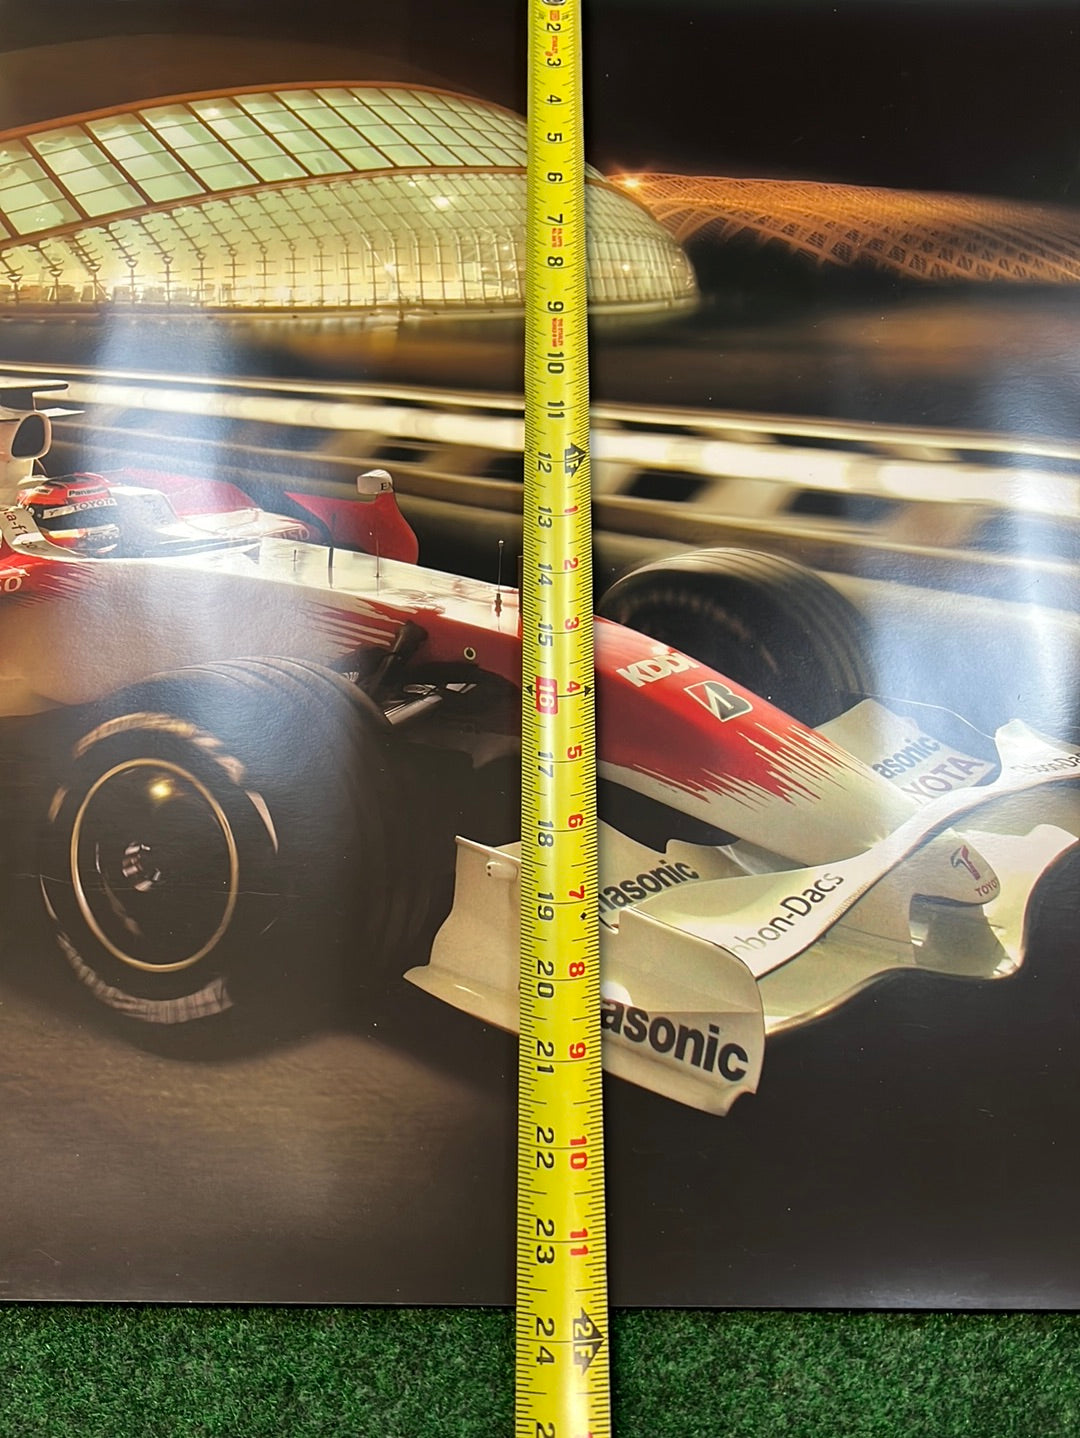 Toyota F1 - One Team One Aim Poster